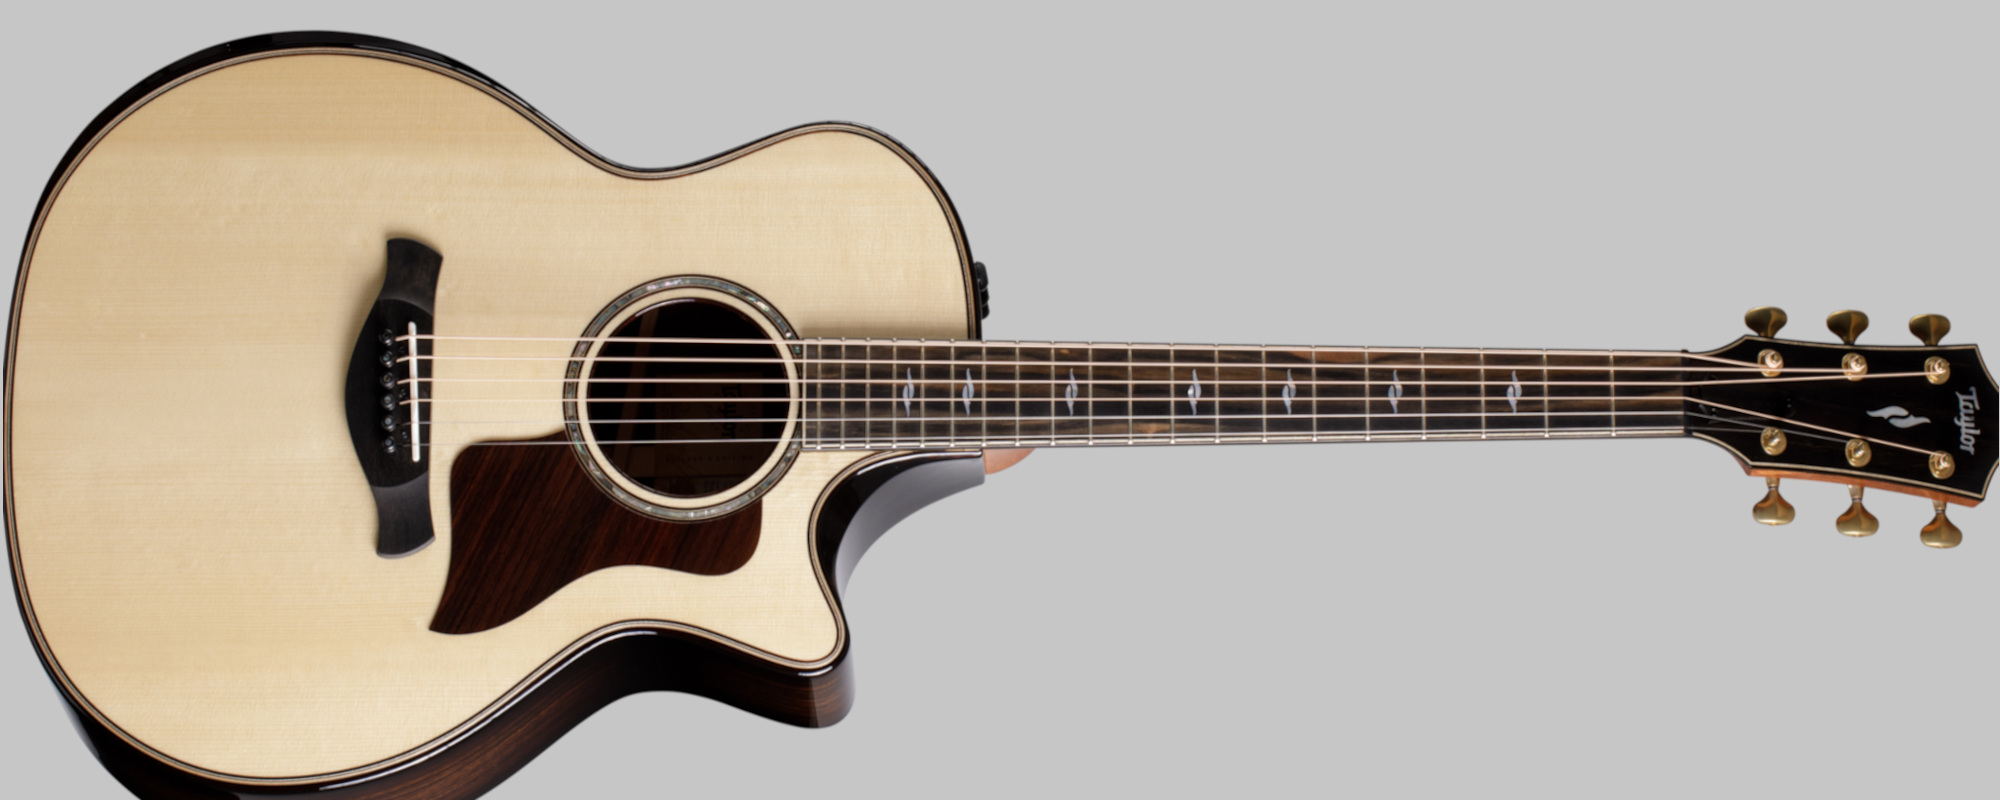 Taylor Guitars’ 814ce gets a Builder’s Edition Upgrade